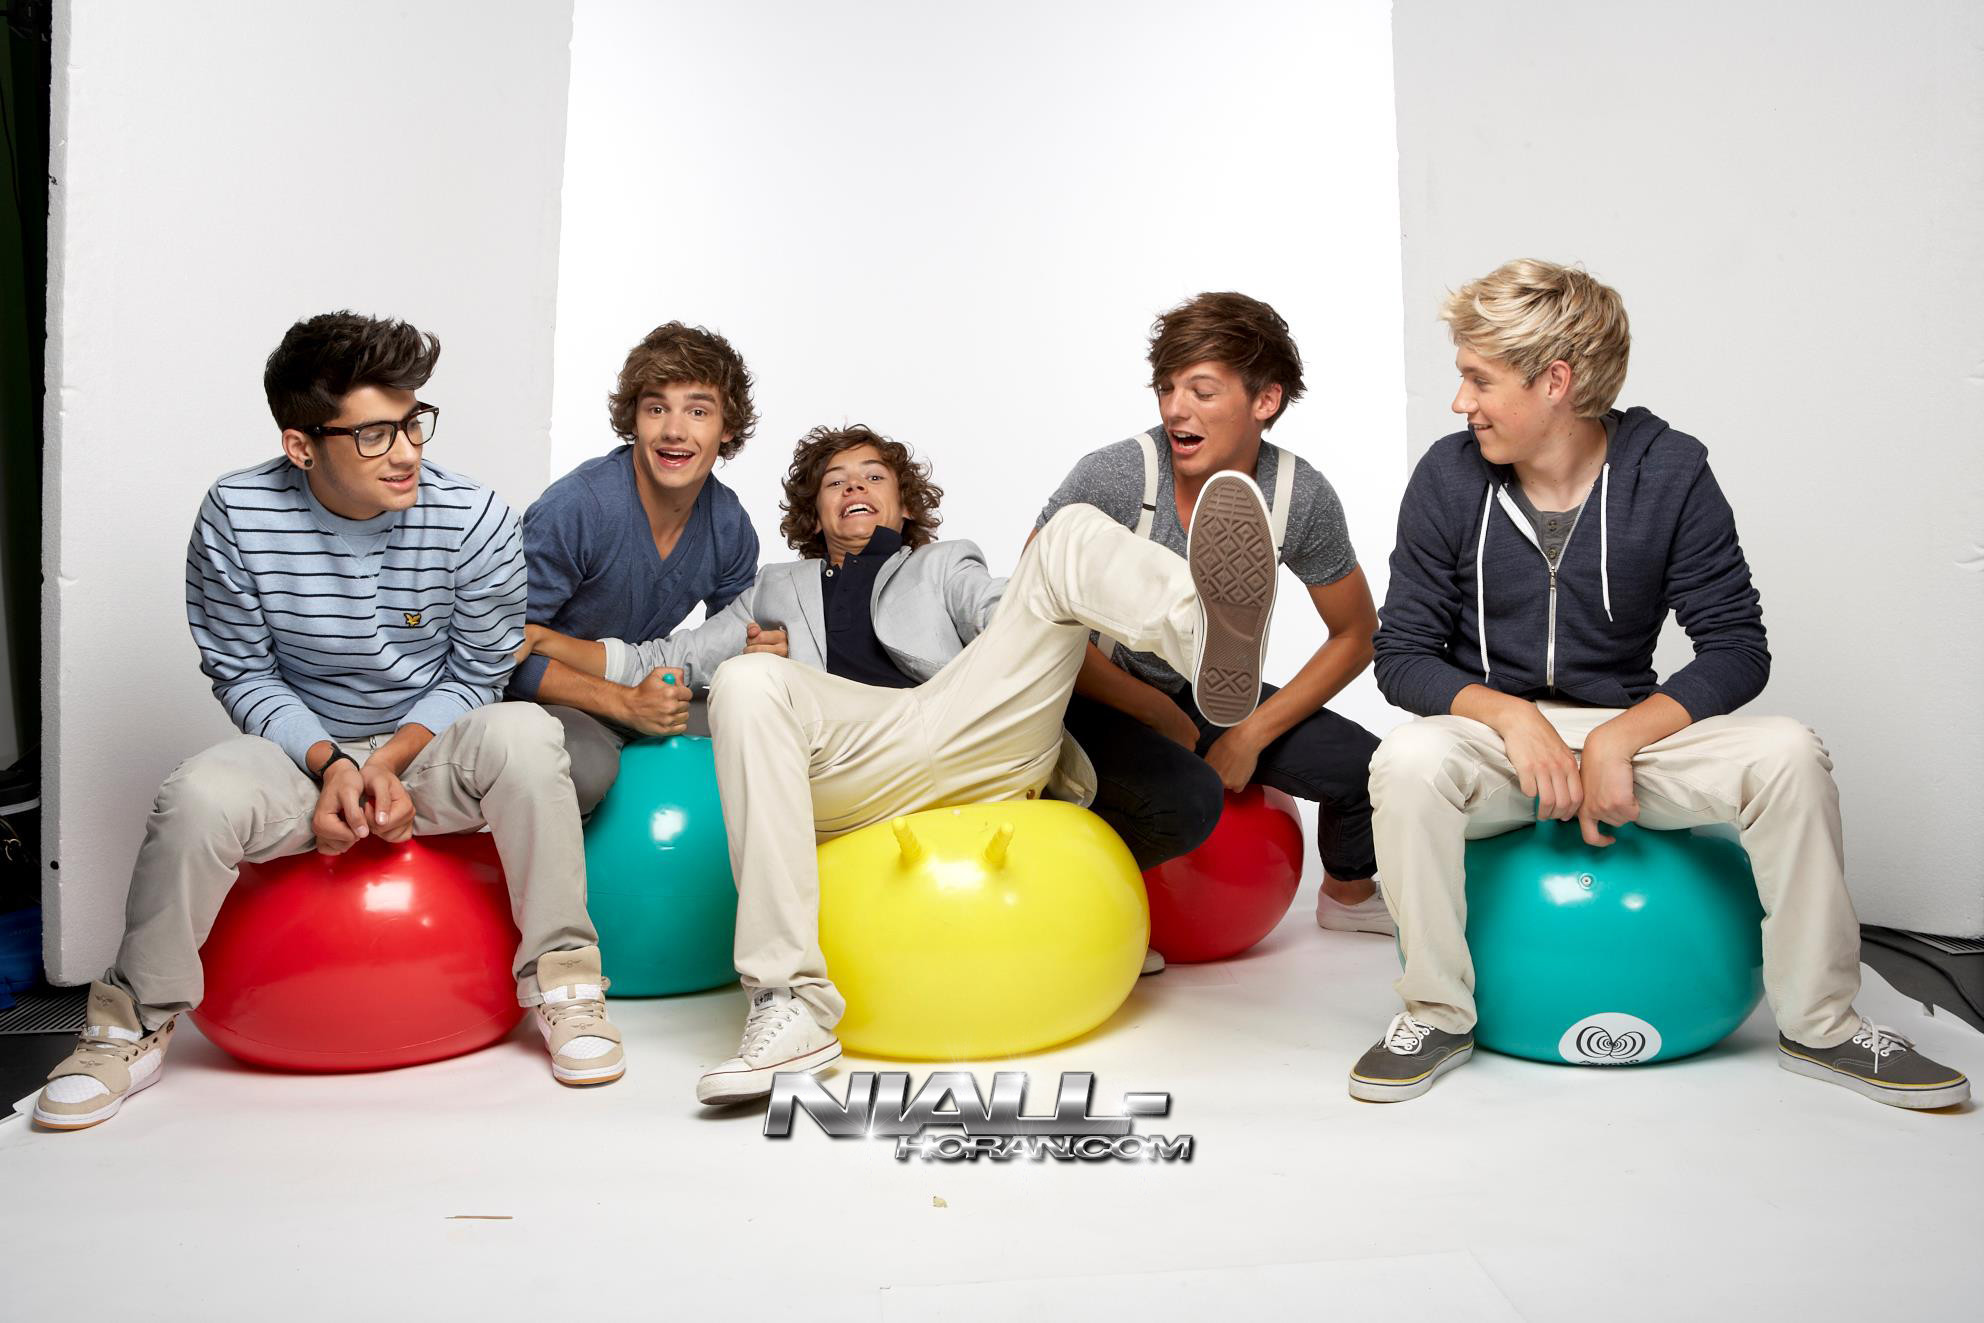 1984x1323 Fun One Direction Wallpapers HD.